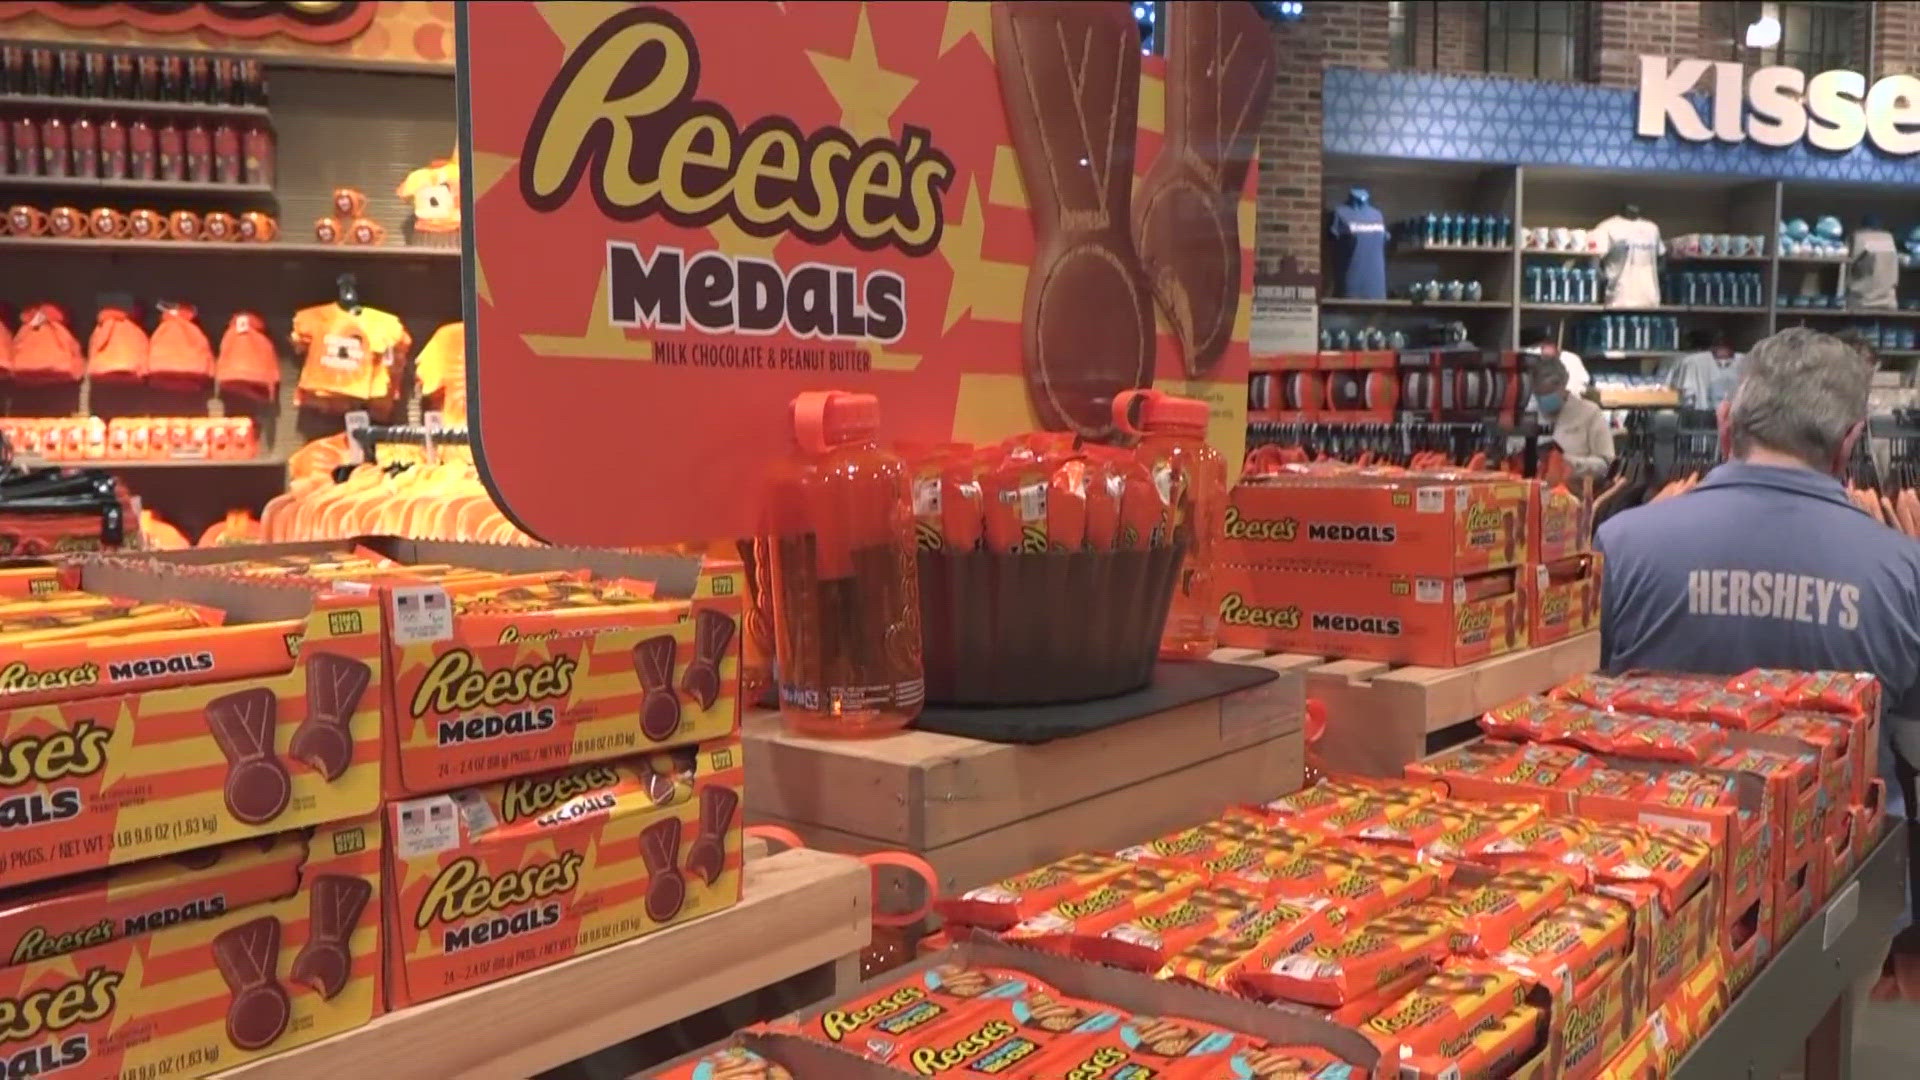 IT'S GIVING REESE'S FANS A CHANCE TO MEDAL... ALONGSIDE THEIR FAVORITE ATHLETE